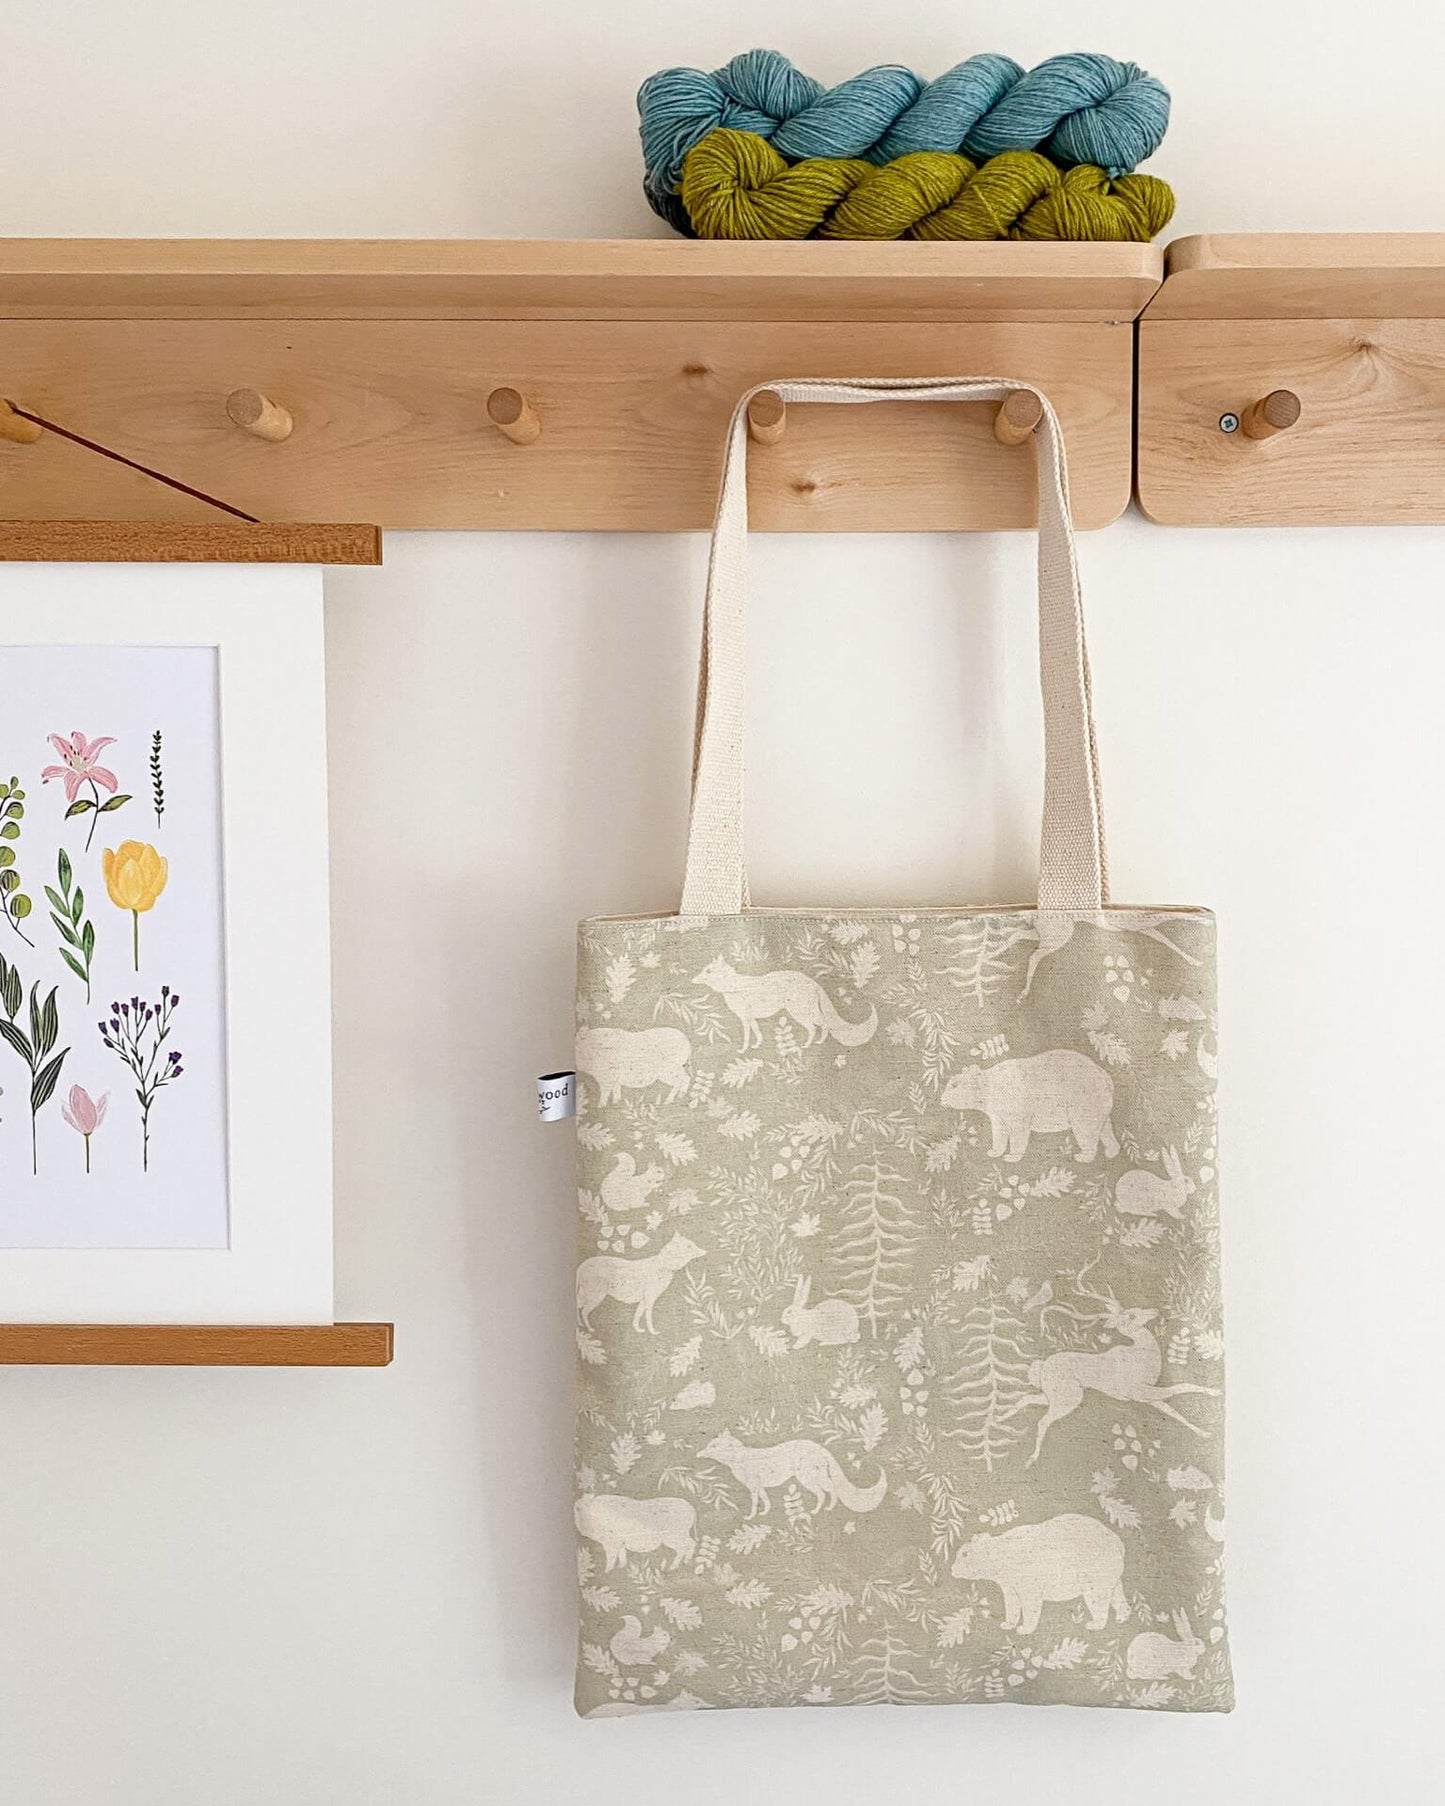 A sage green tote bag hangs from a set of wooden hooks. The bag is sage green in colour and covered in a woodland print. It has two long cream coloured handles. Above the bag on a shelf are some hanks of yarn and hanging next to the bag is a floral print.